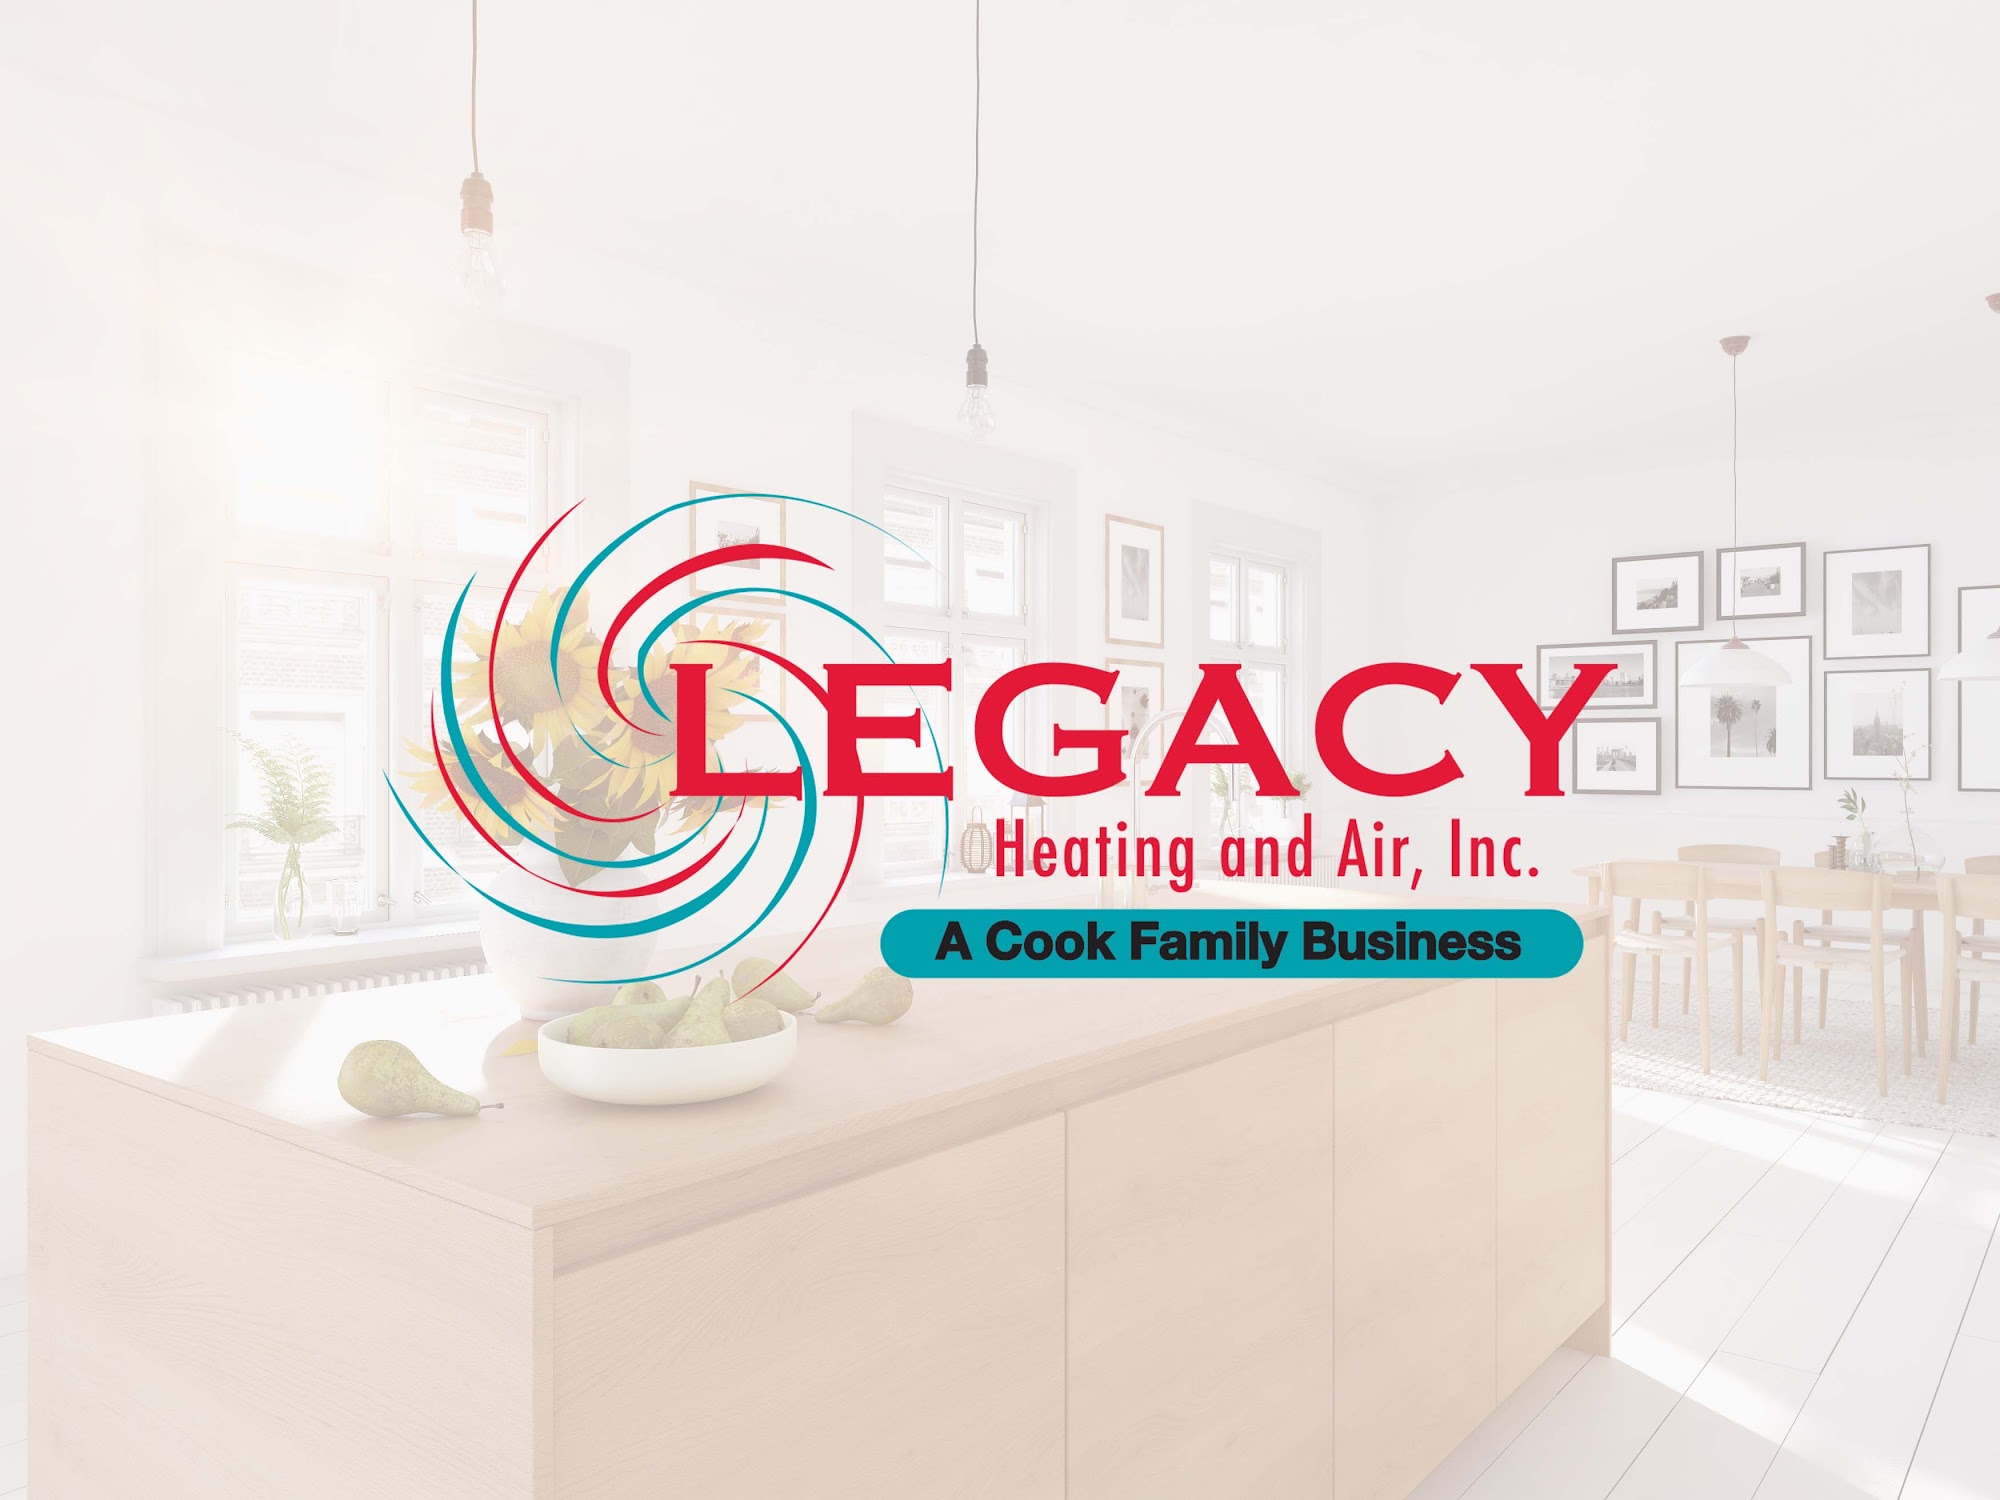 Legacy Heating and Air, Inc.